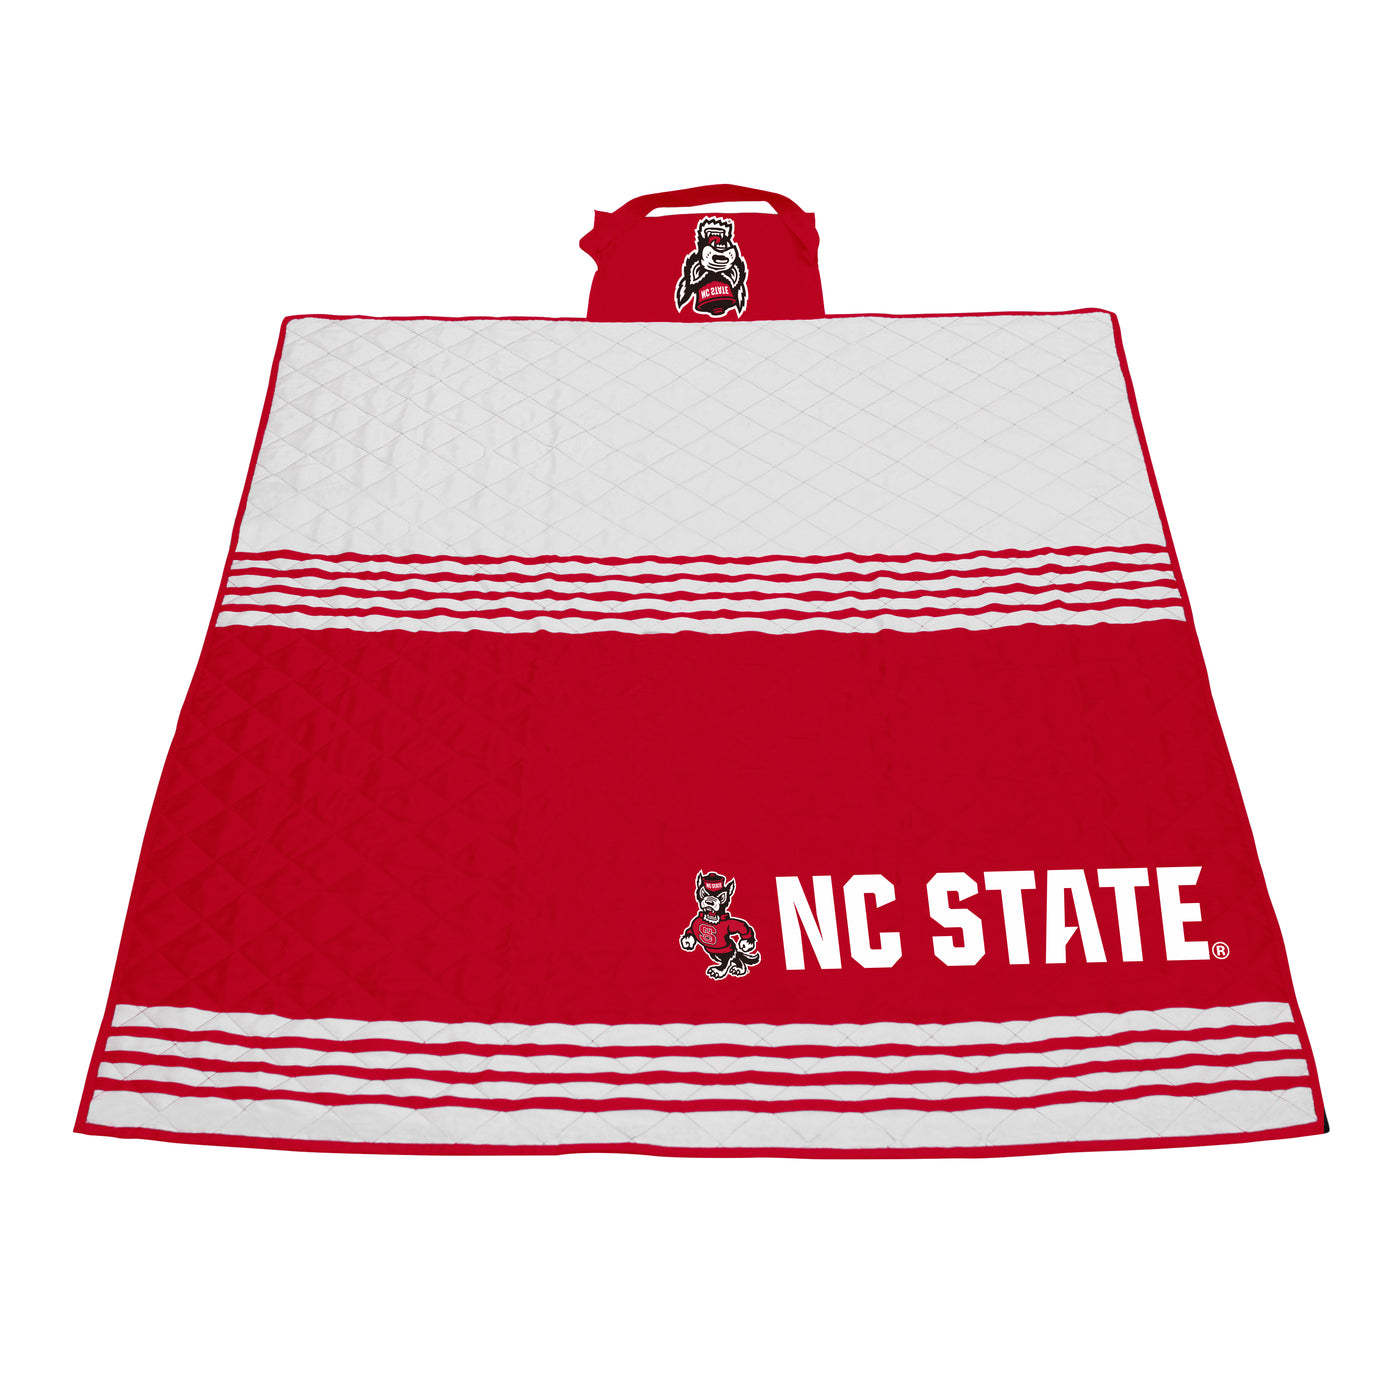 NC State Outdoor Blanket